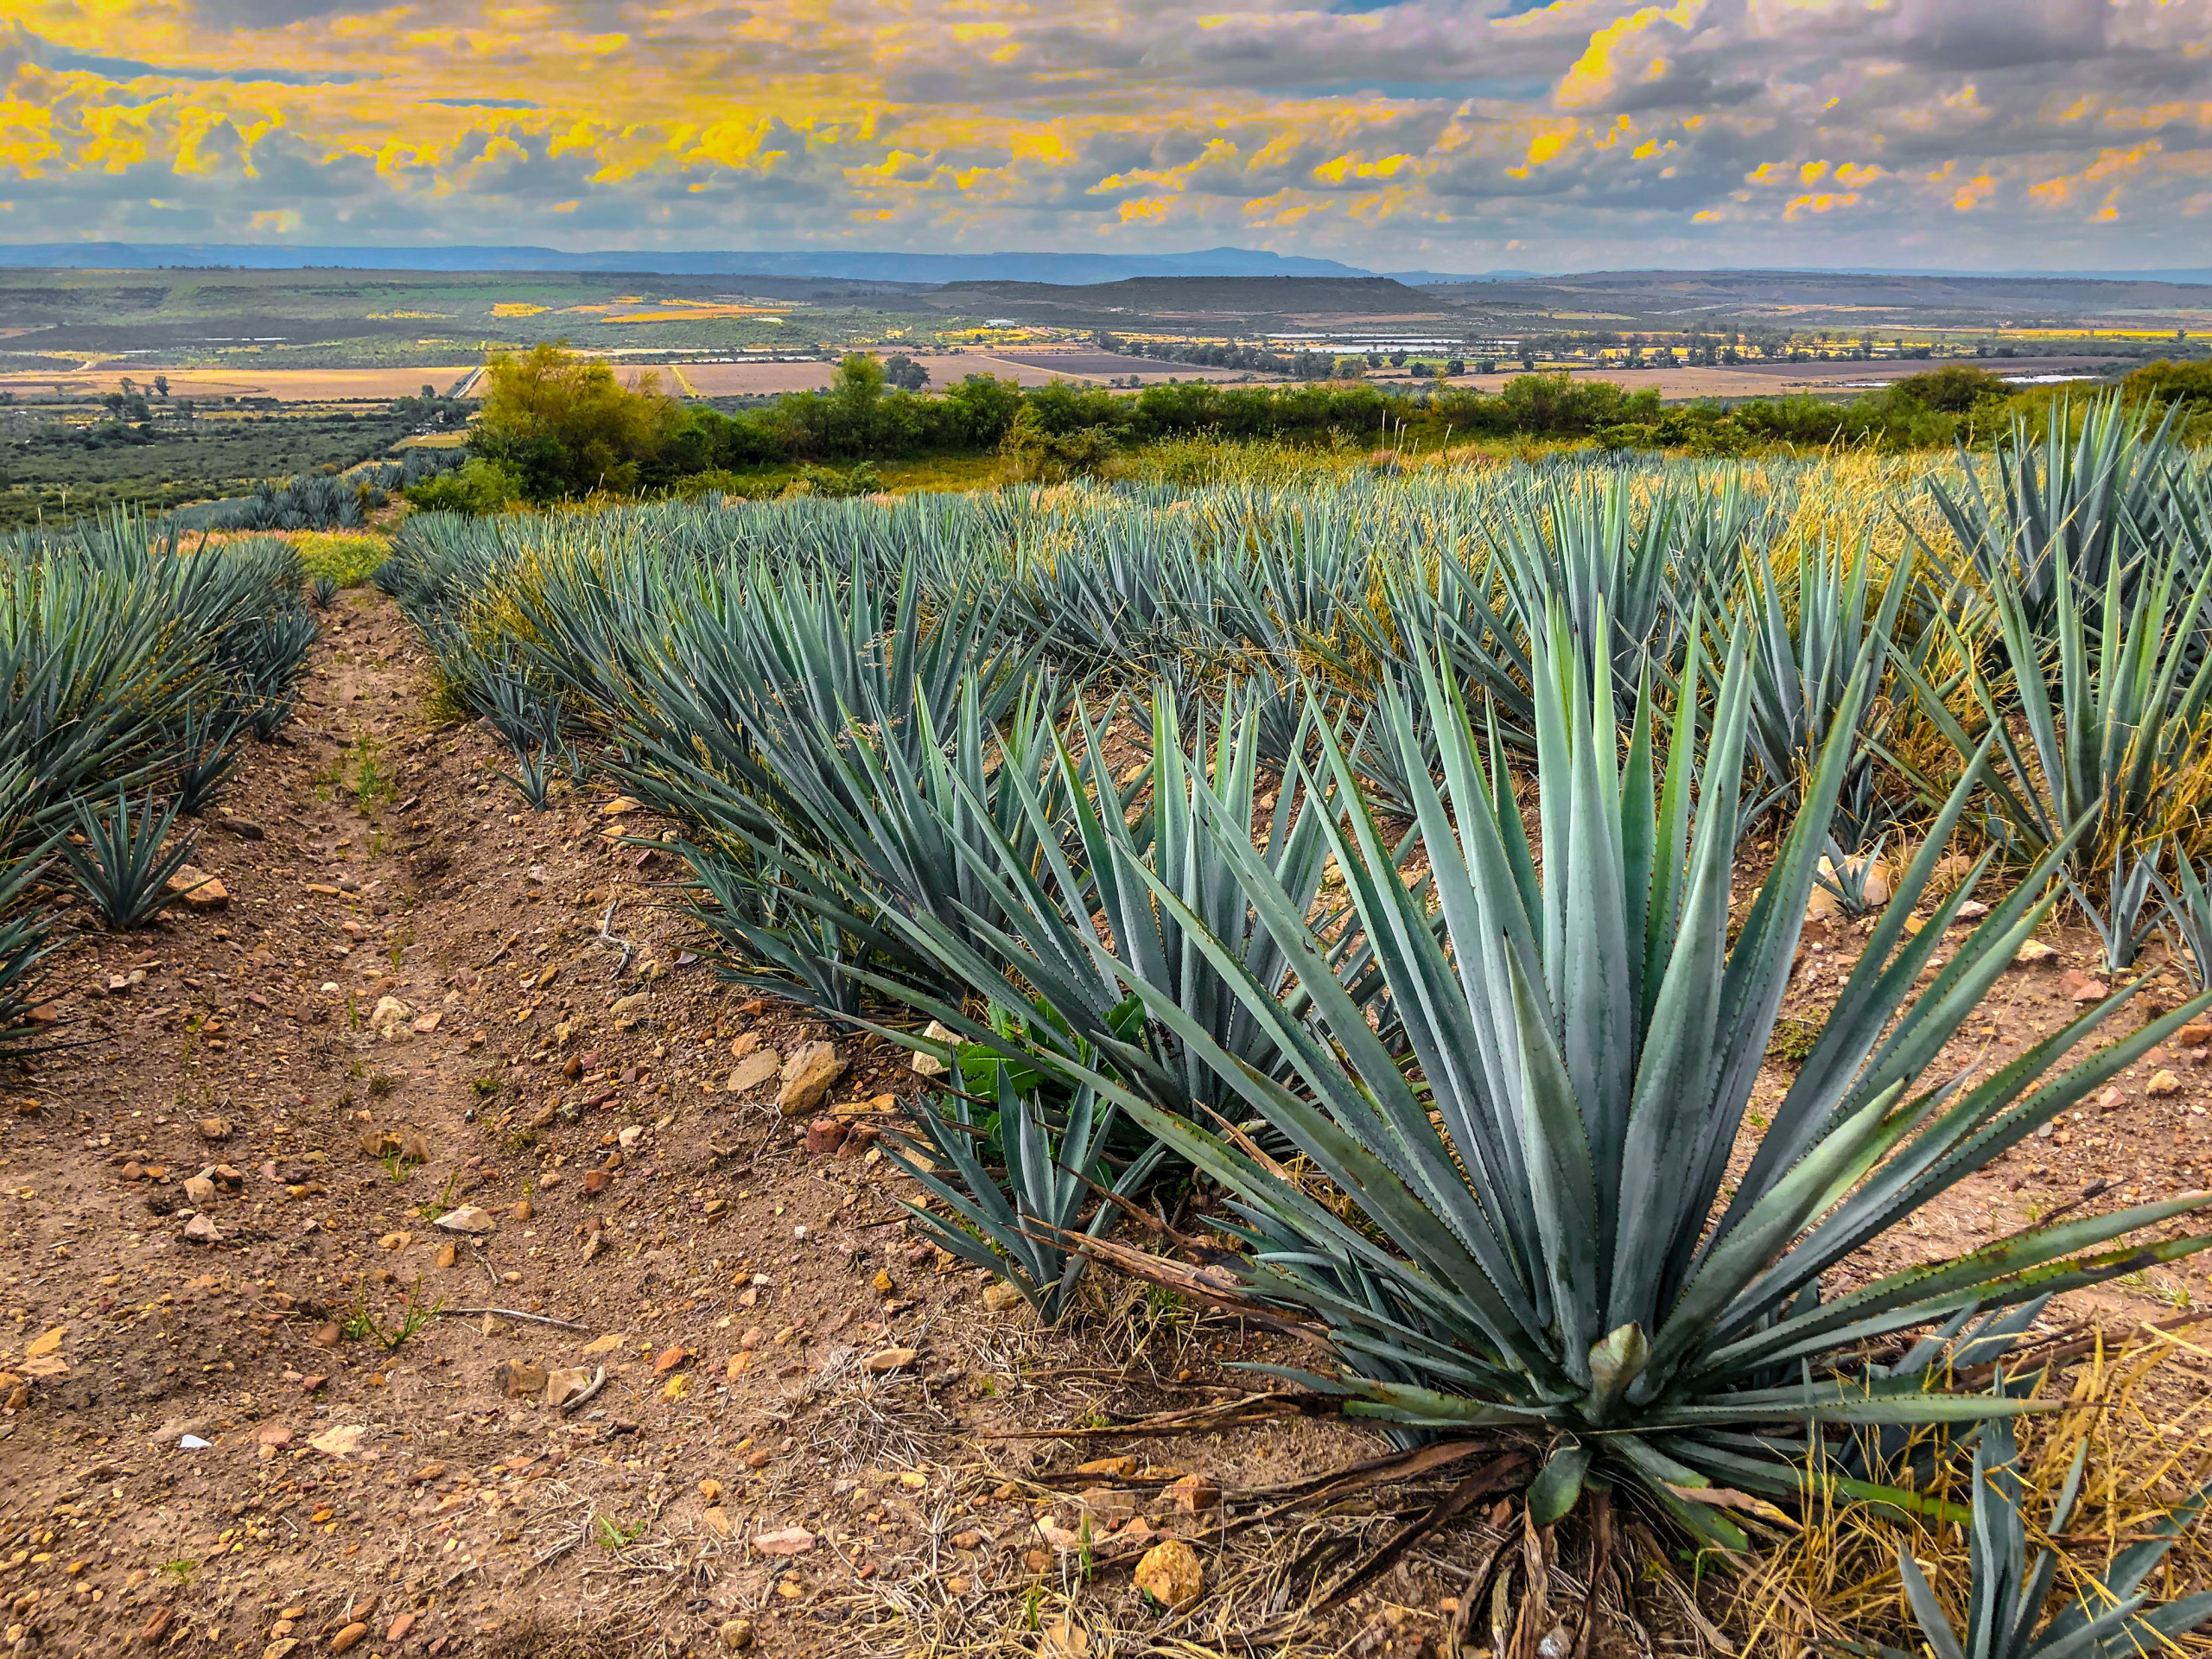 Blue agave fields in Jalisco, Mexico.